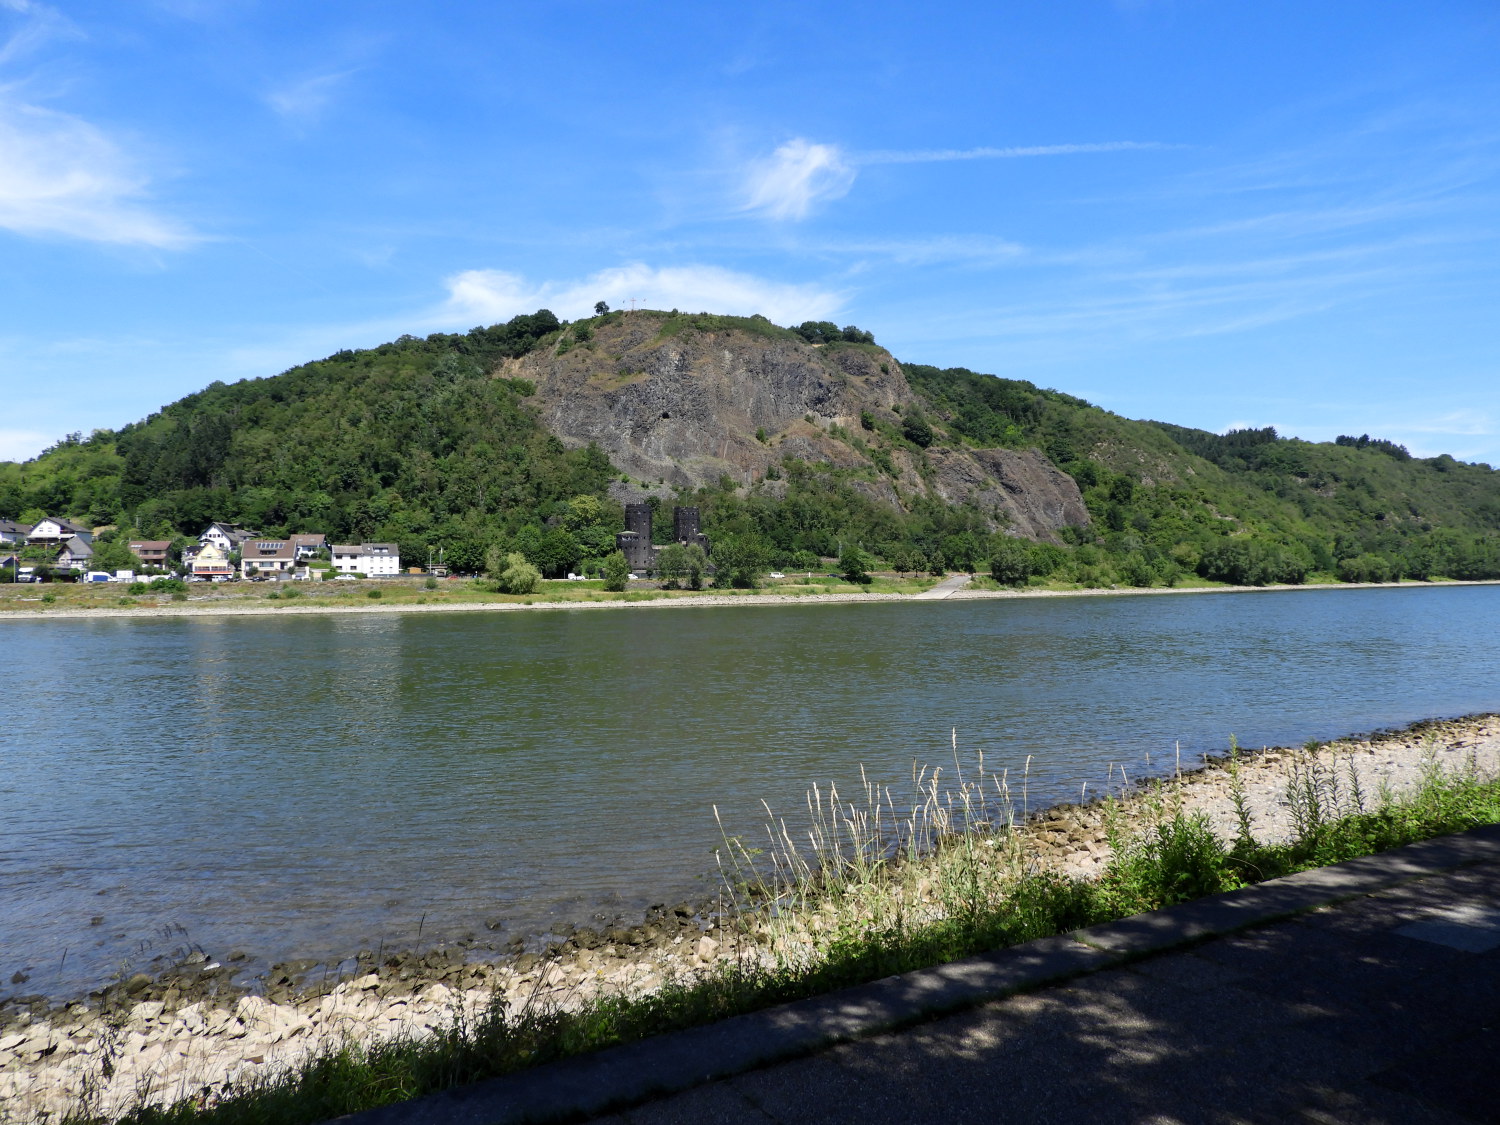 Site of the Battle for the Bridge at Remagen